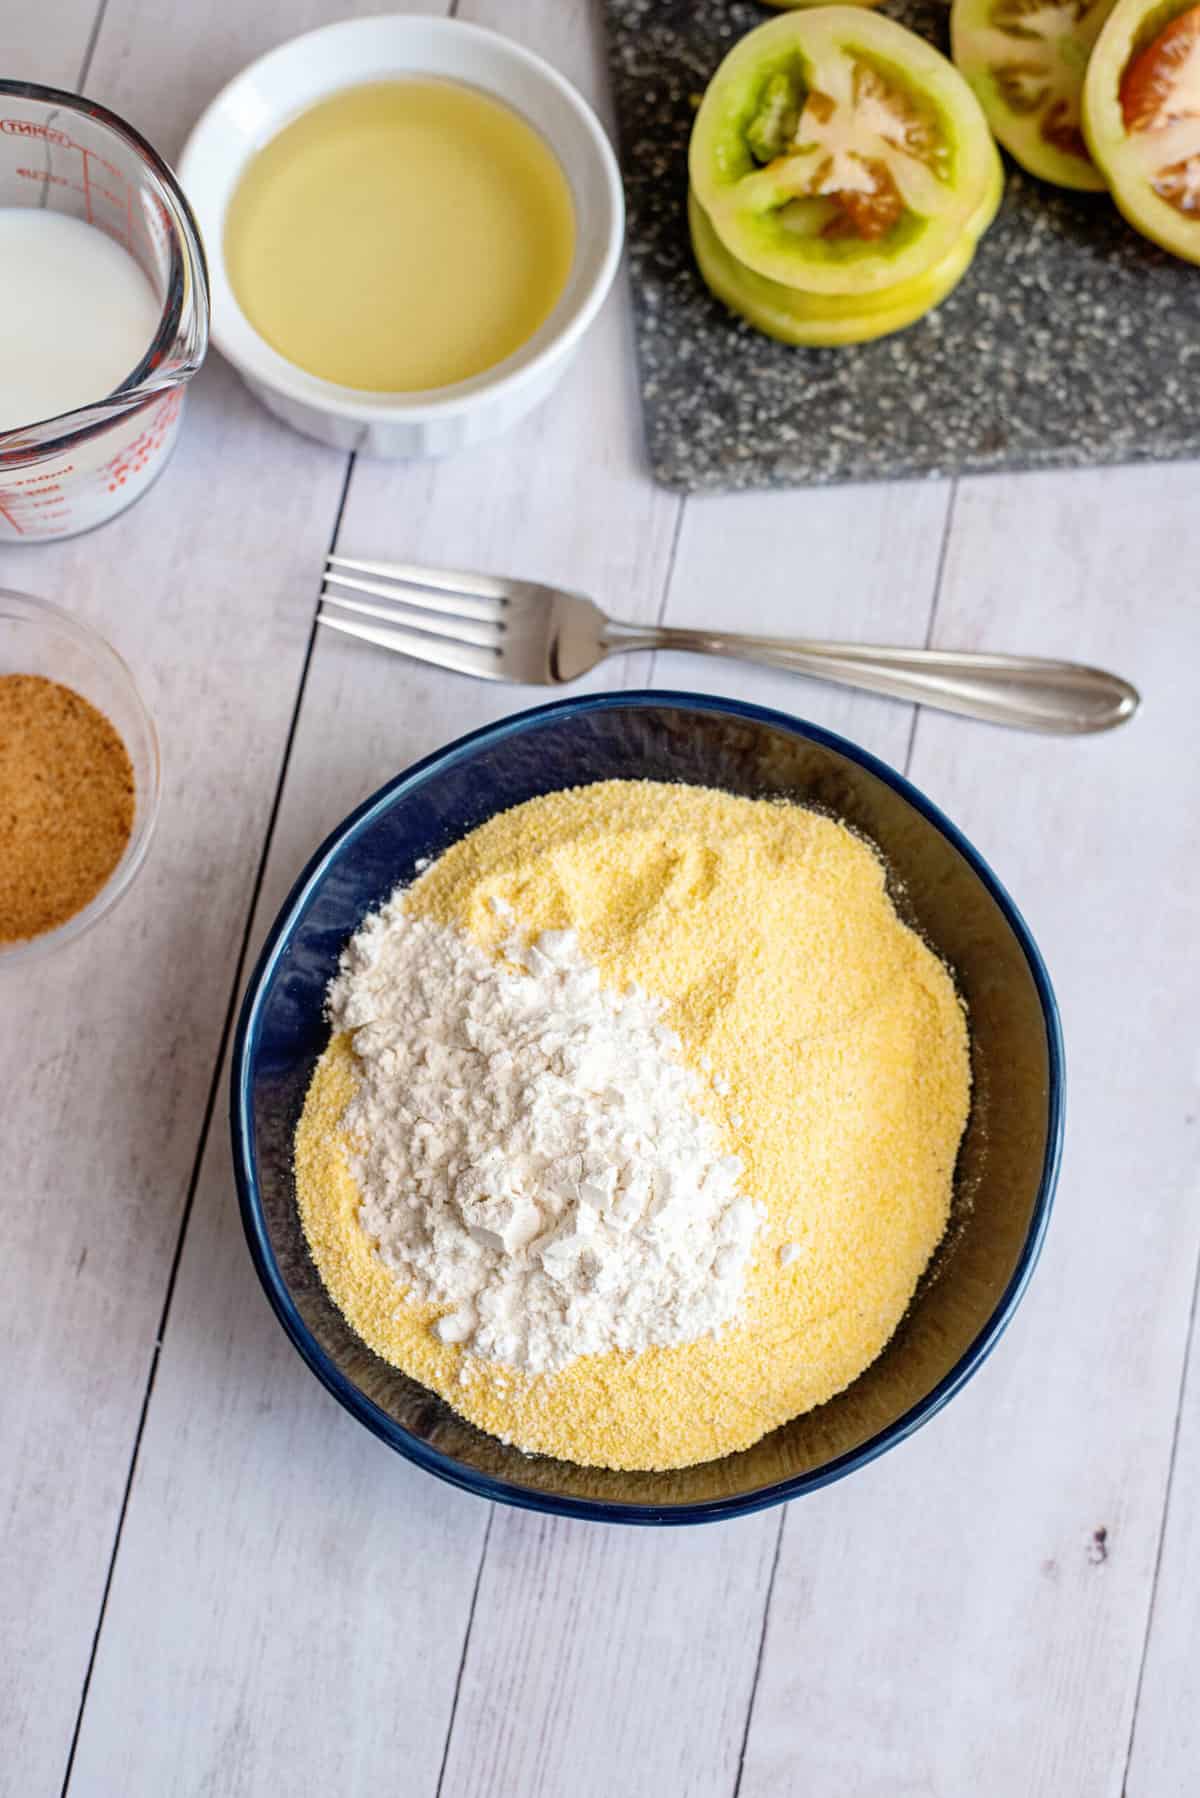 combine flour and cornmeal in a bowl